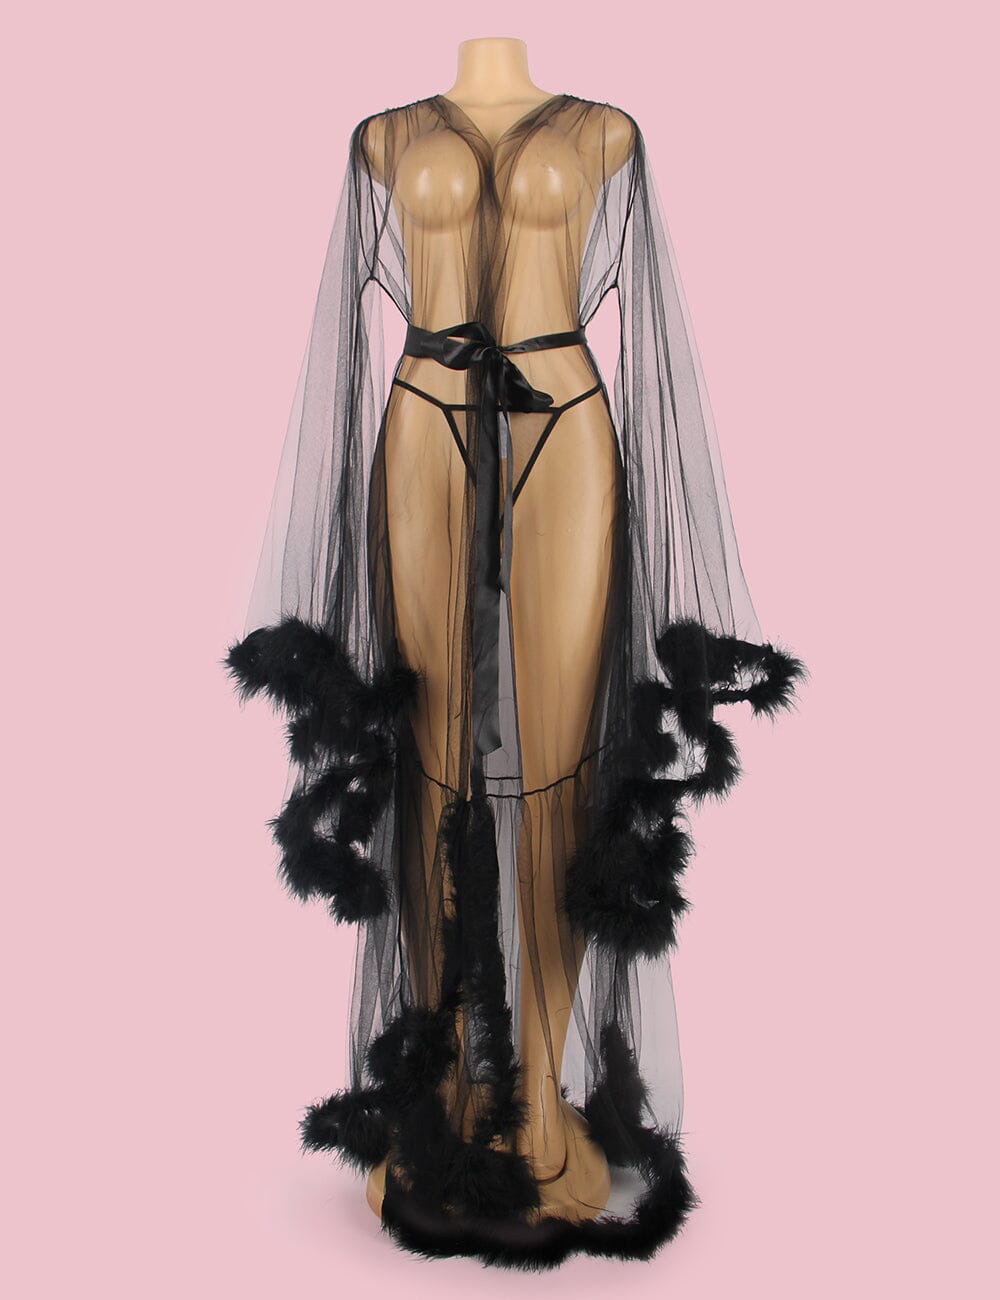 a mannequin dressed in a black lingerie with feathers